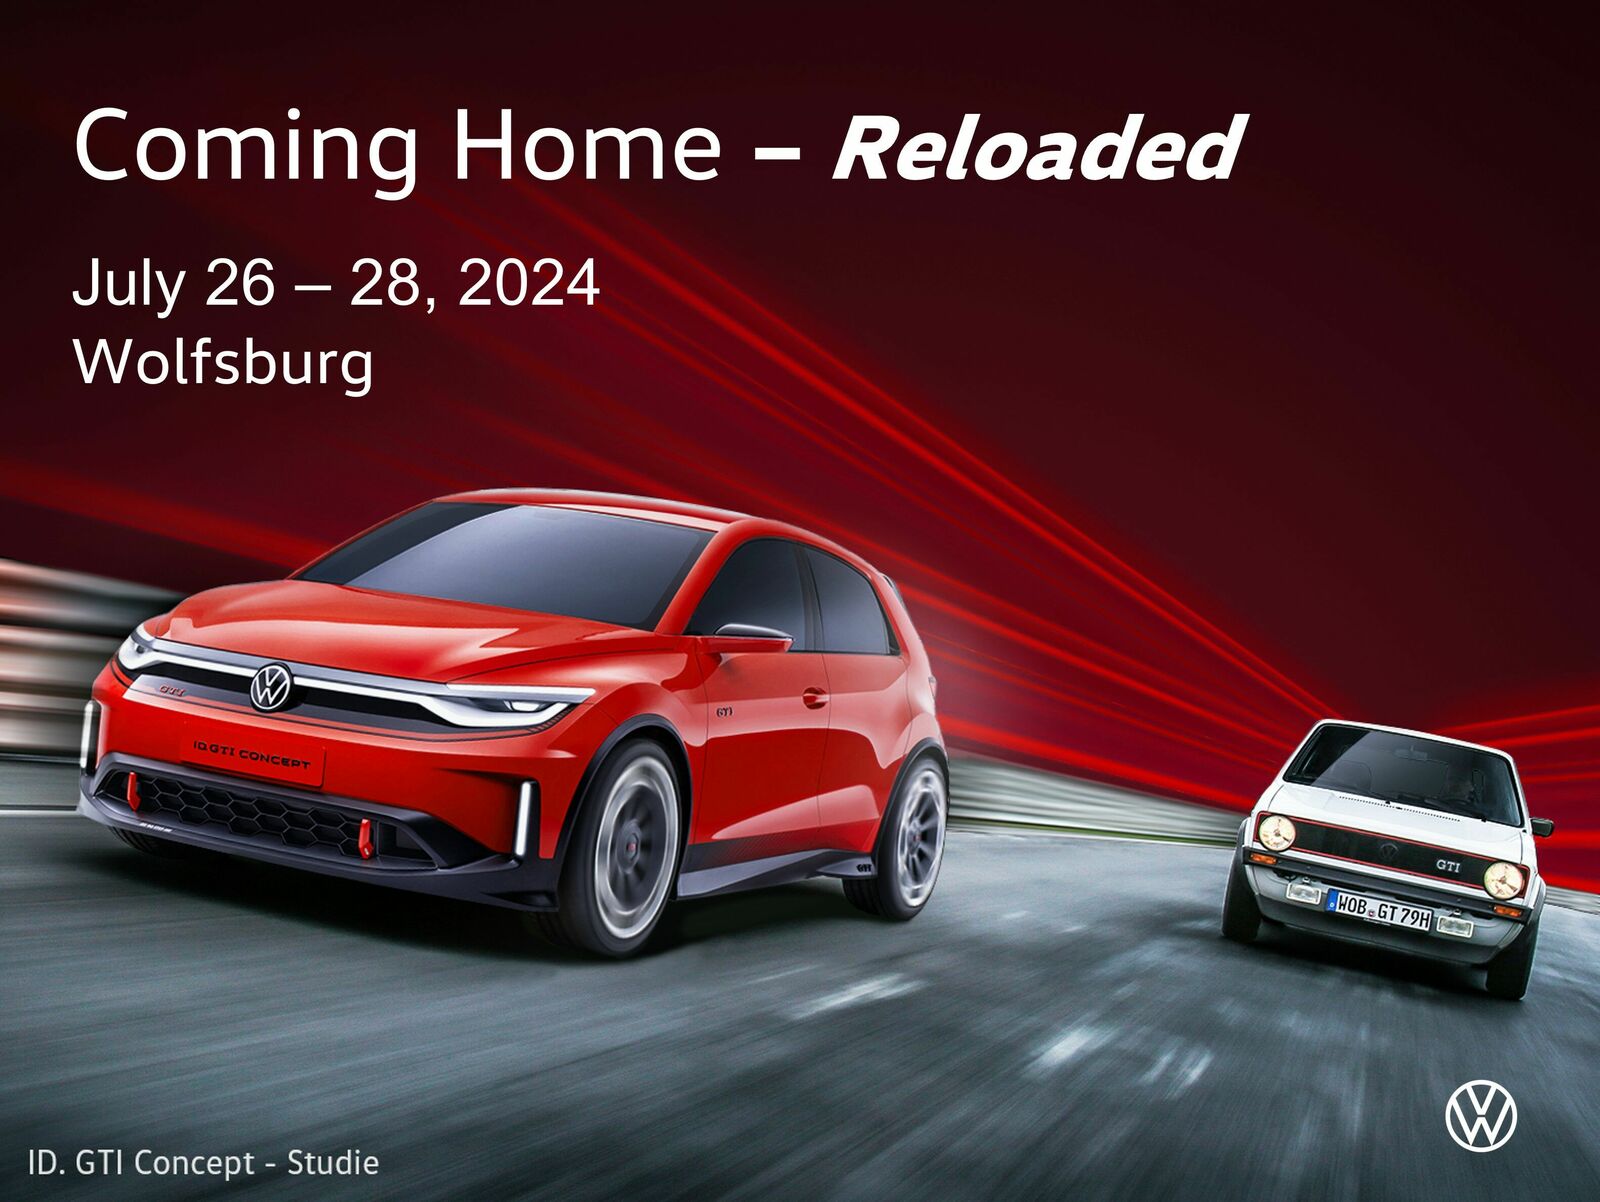 Save the date: Legendary GTI Meeting to be held in Wolfsburg from July 26 – 28, 2024